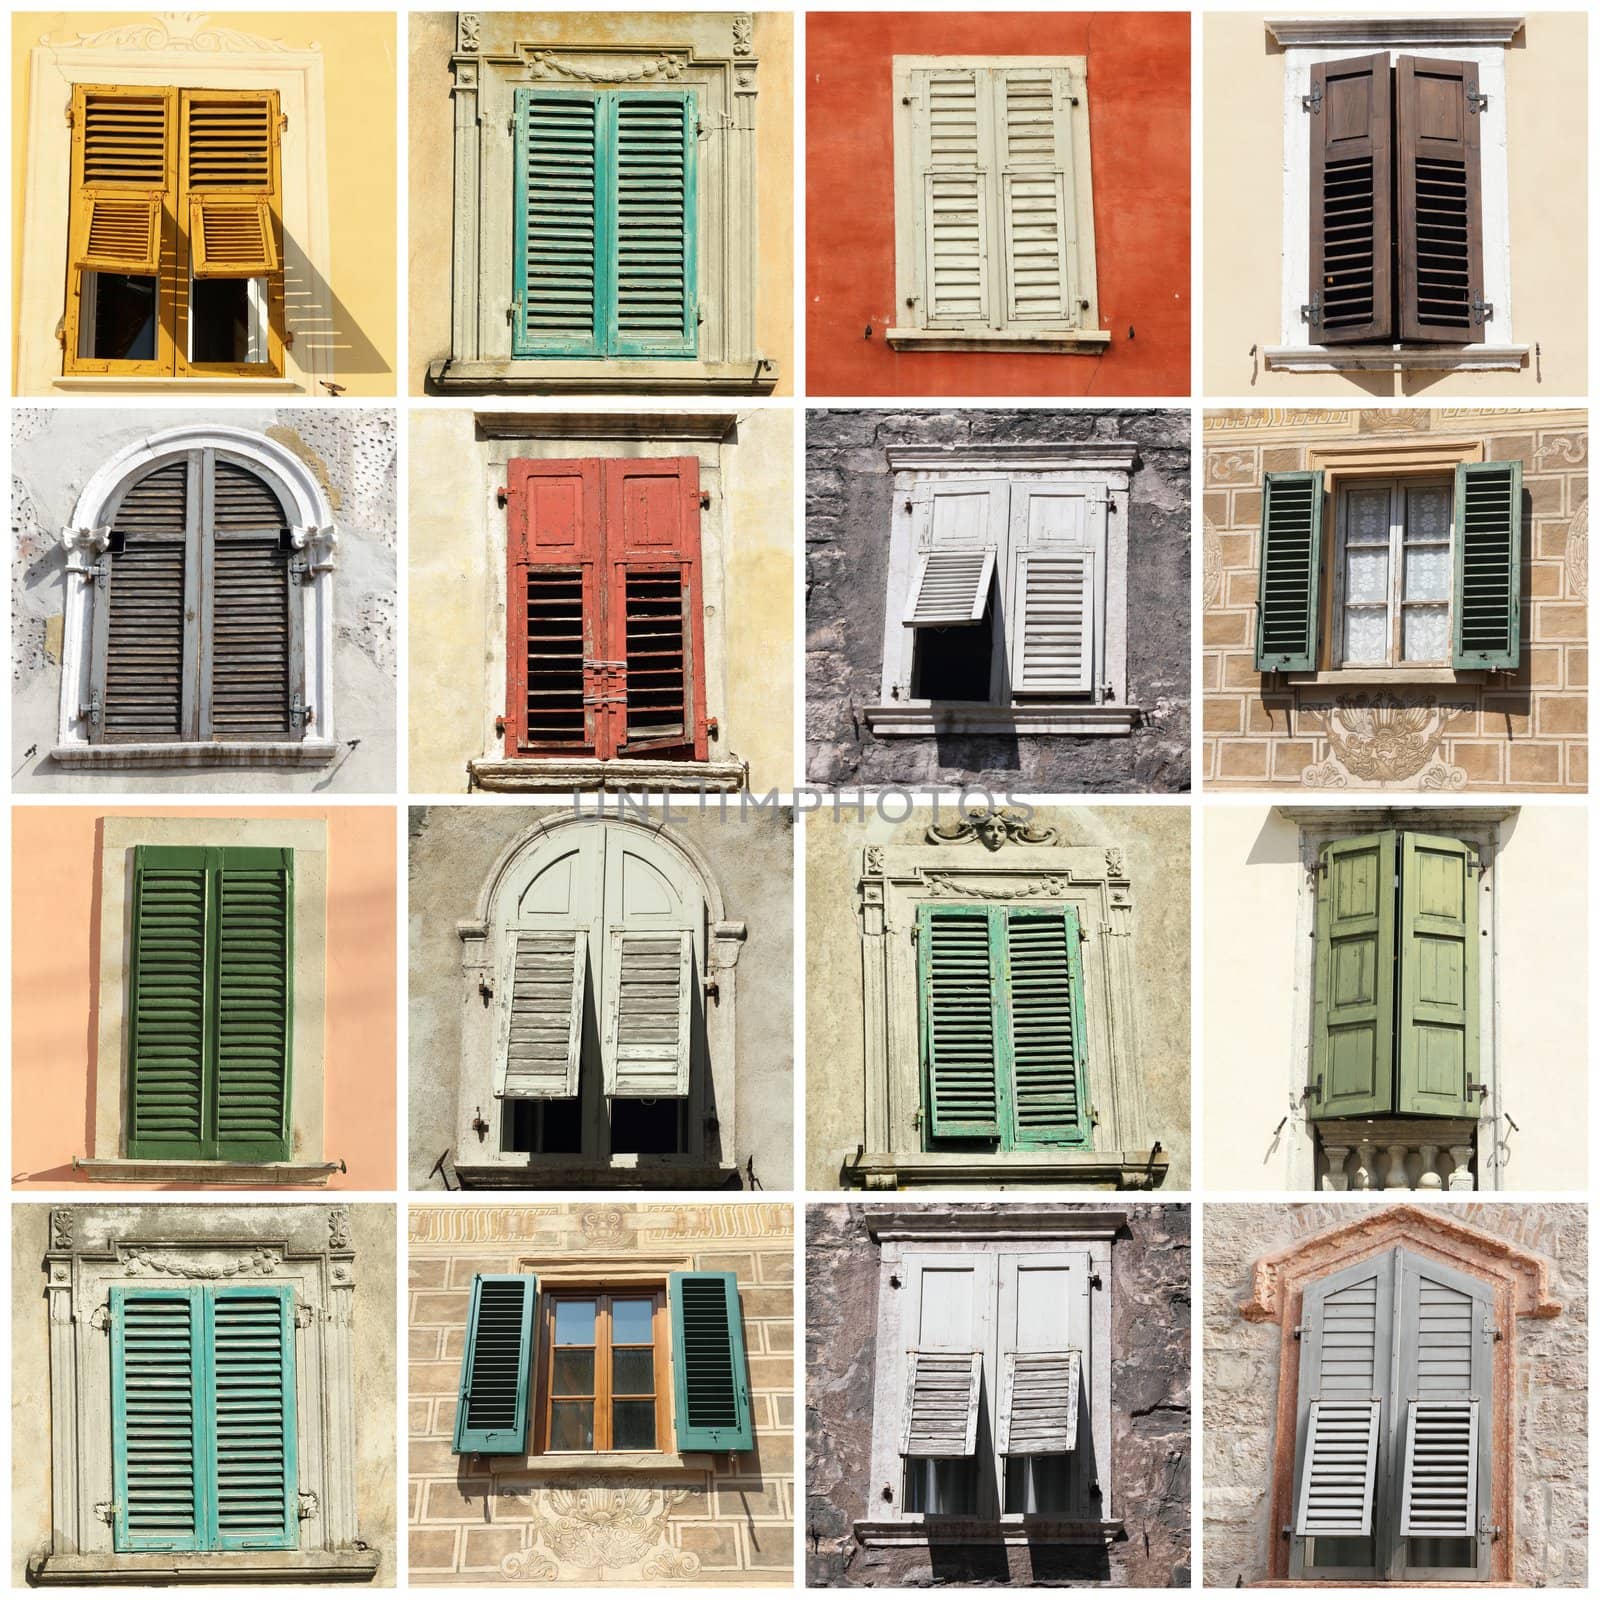 collage with antique windows with shutters in Italy, Europe